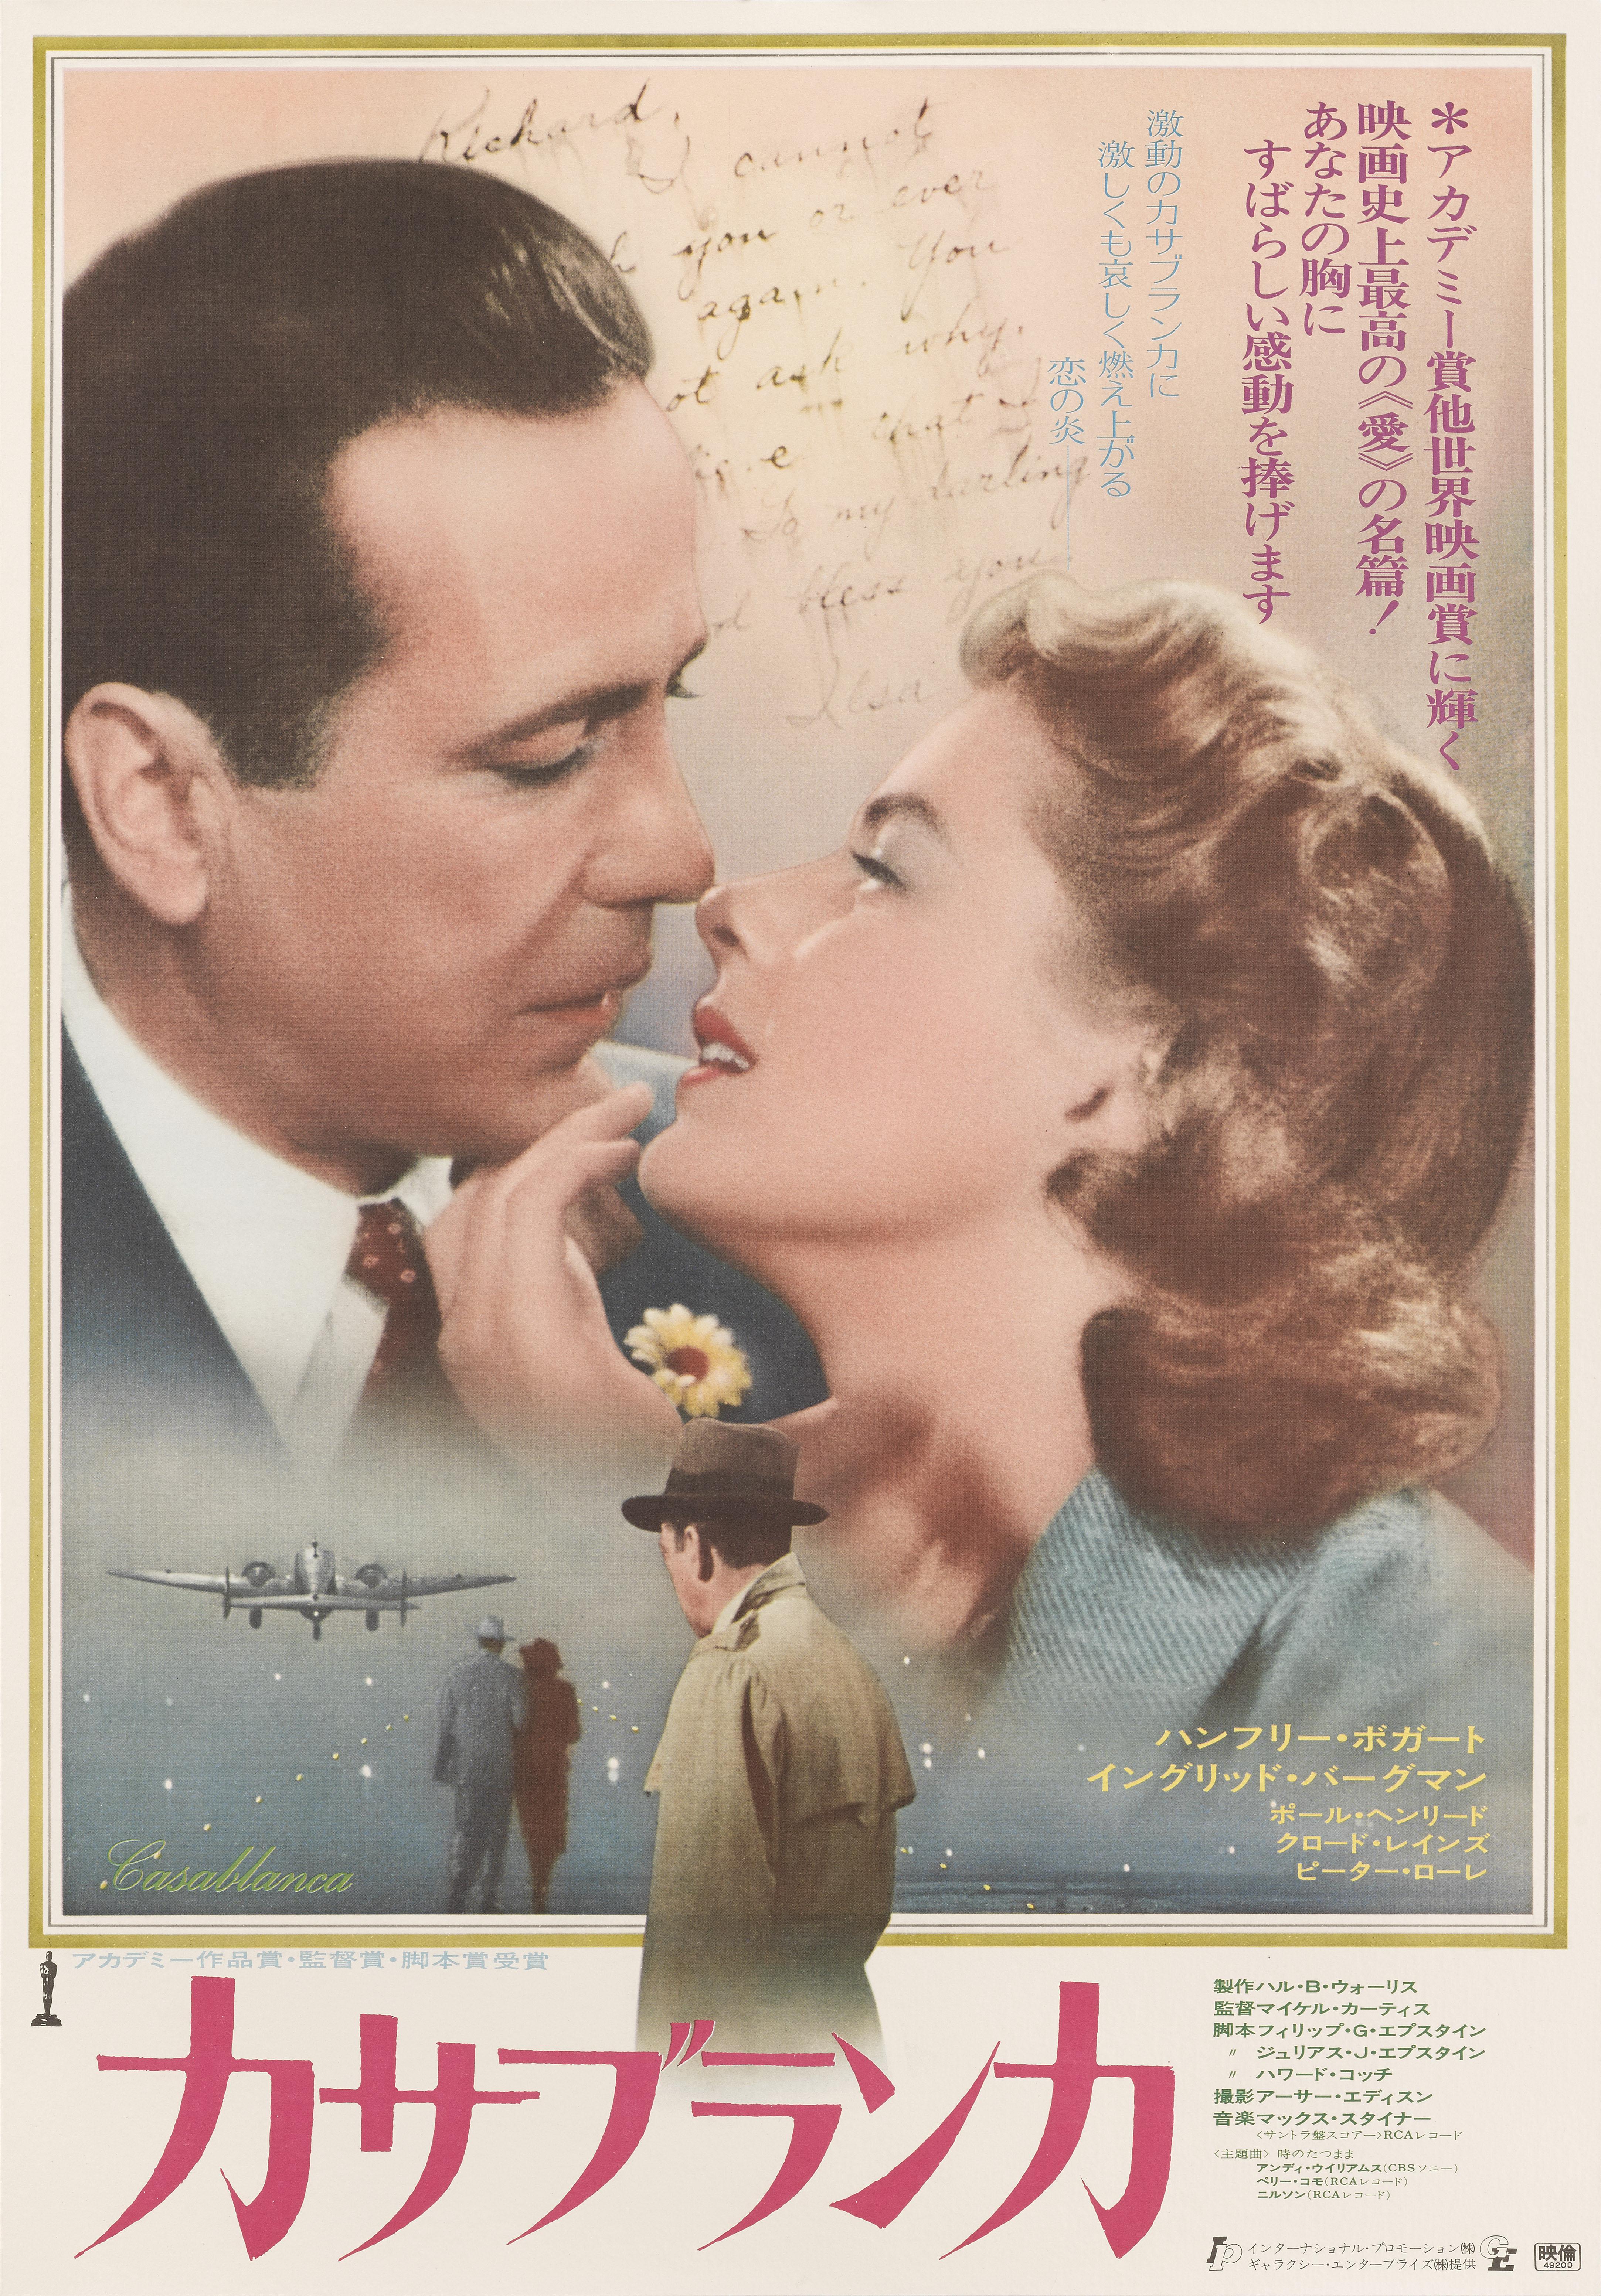 Original Japanese film poster for Humphrey Bogart, Ingrid Bergman's 1942 classic. Directed by Michael Curtiz. The movie was shown in Japan in 1946.Due to it's popularity it was re released a few times. This poster was used for the films 1974